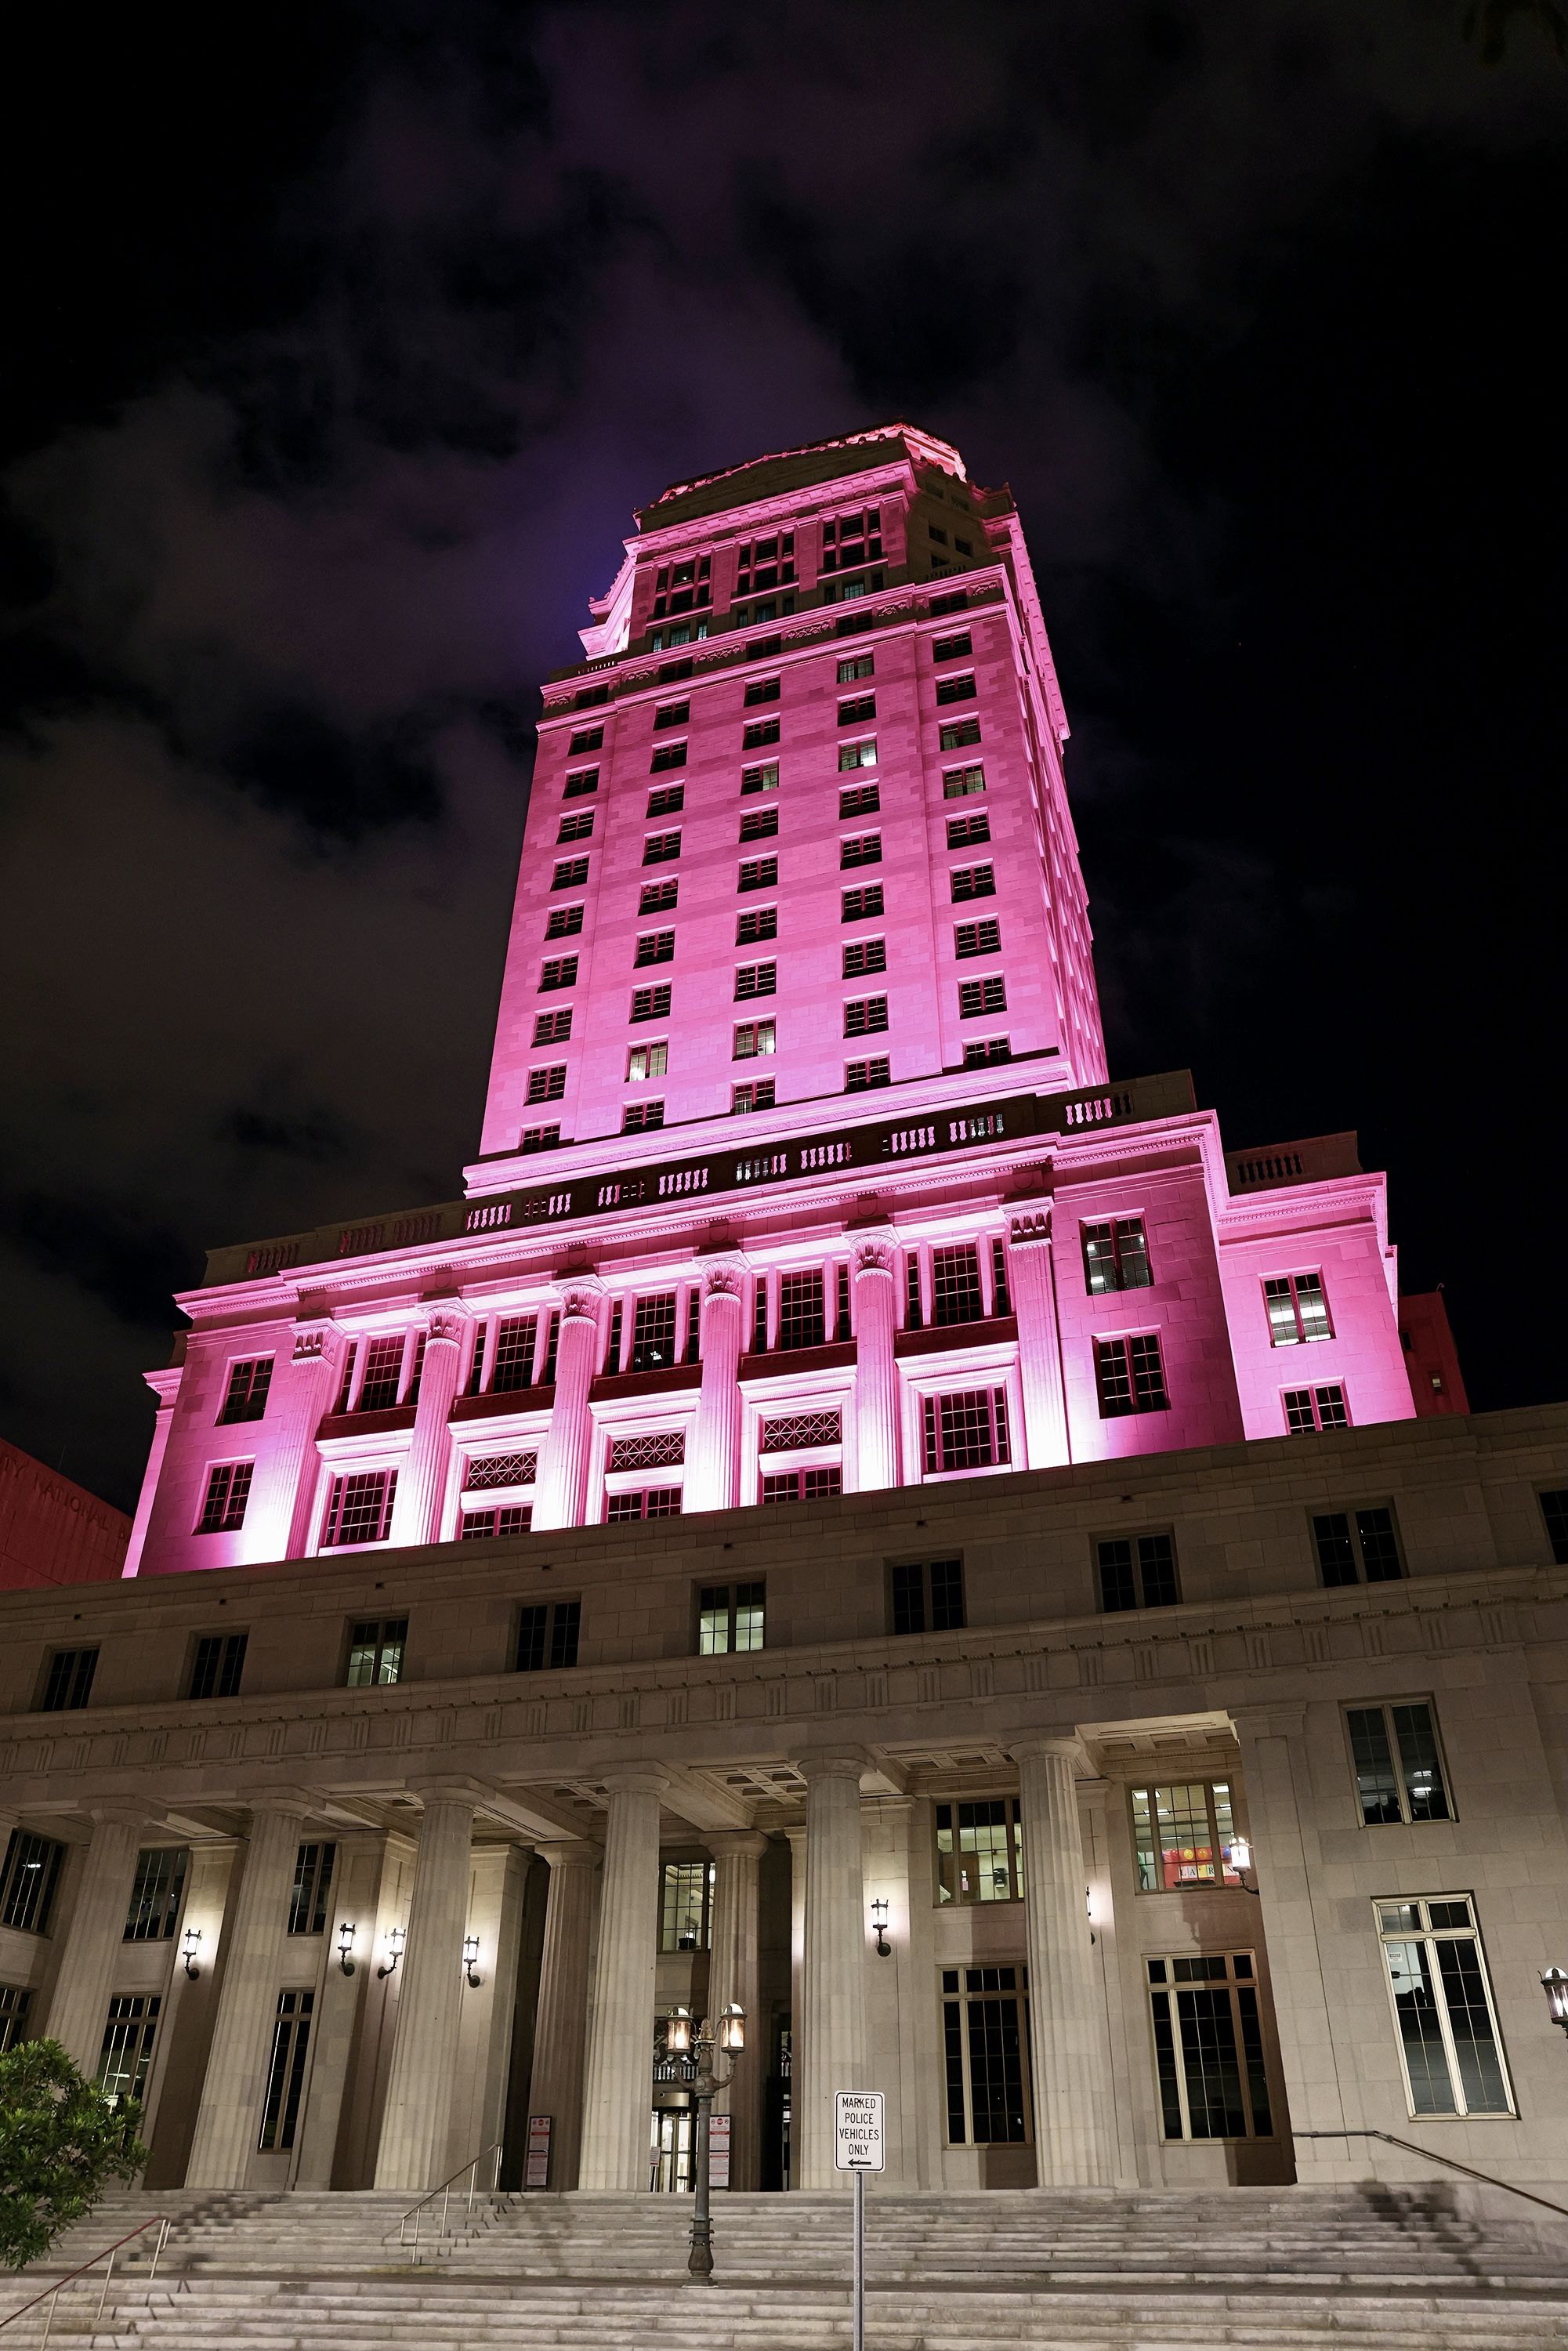 The Miami-Dade County Courthouse illuminates a colored light in honor of COVID-19 victims